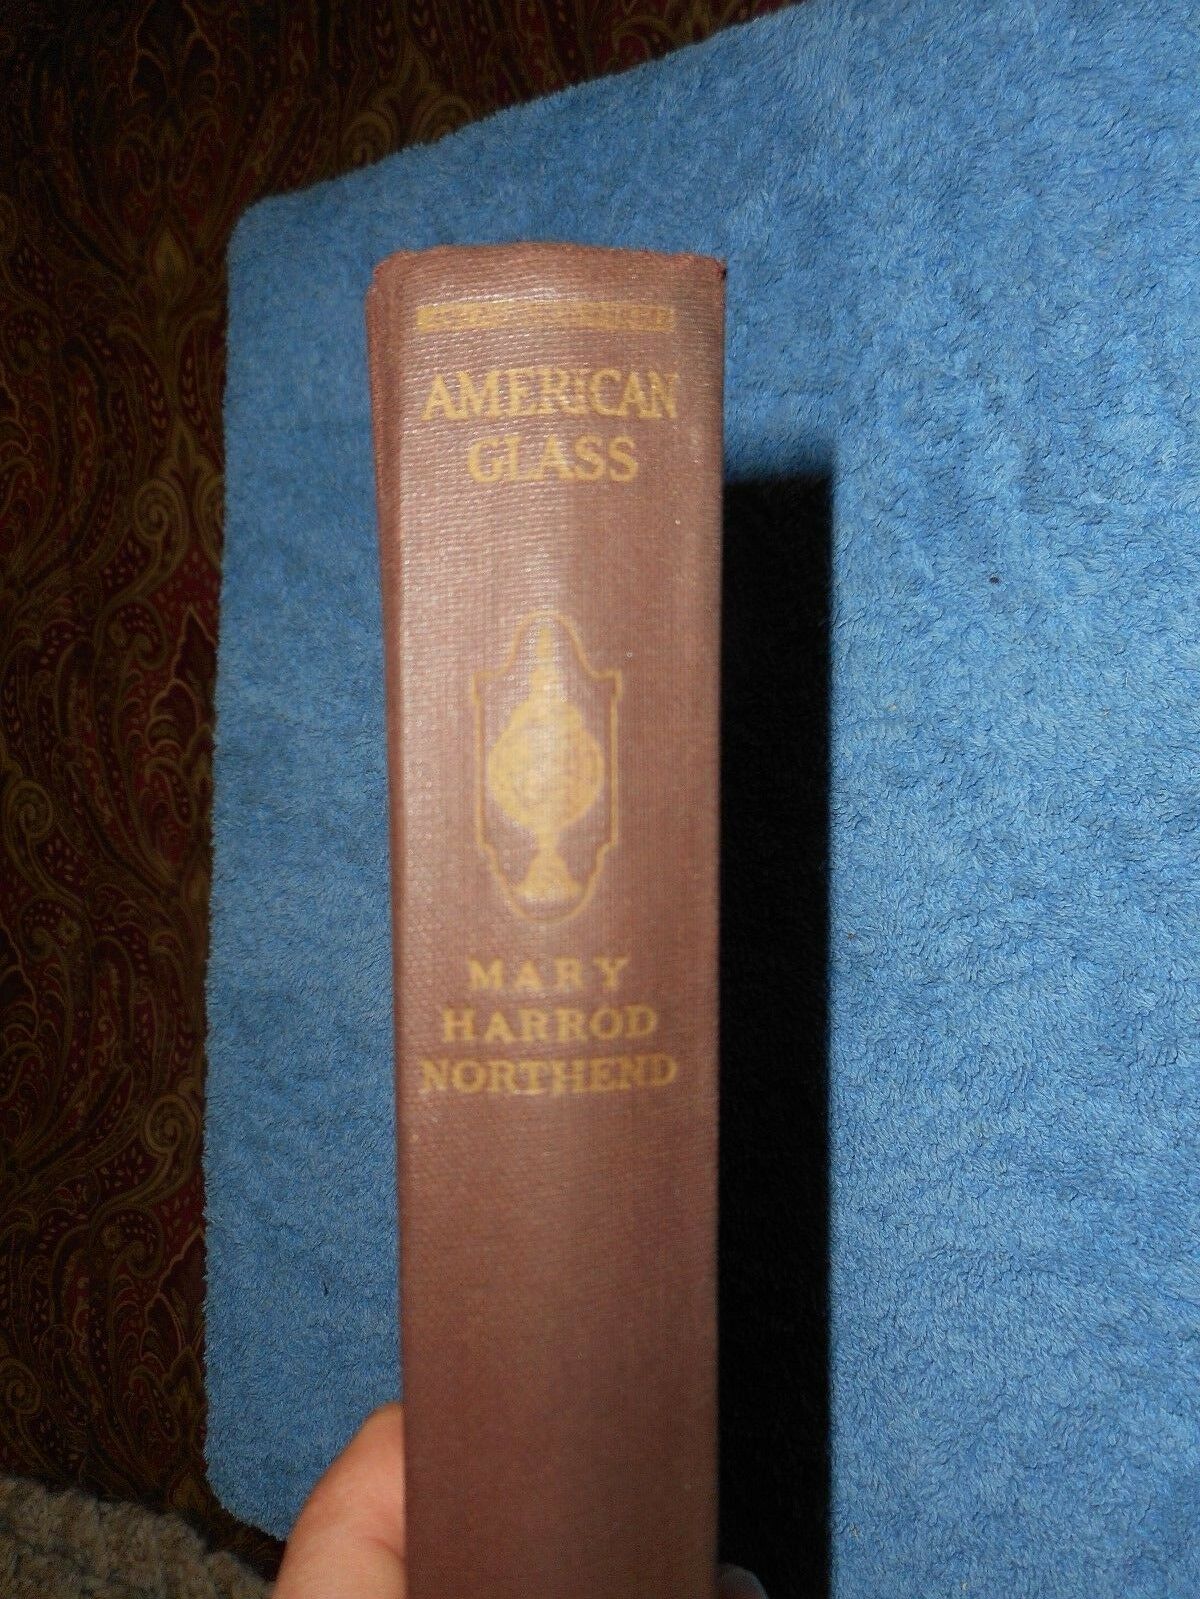 American Glass By Mary Harrod Northend Hc 1944